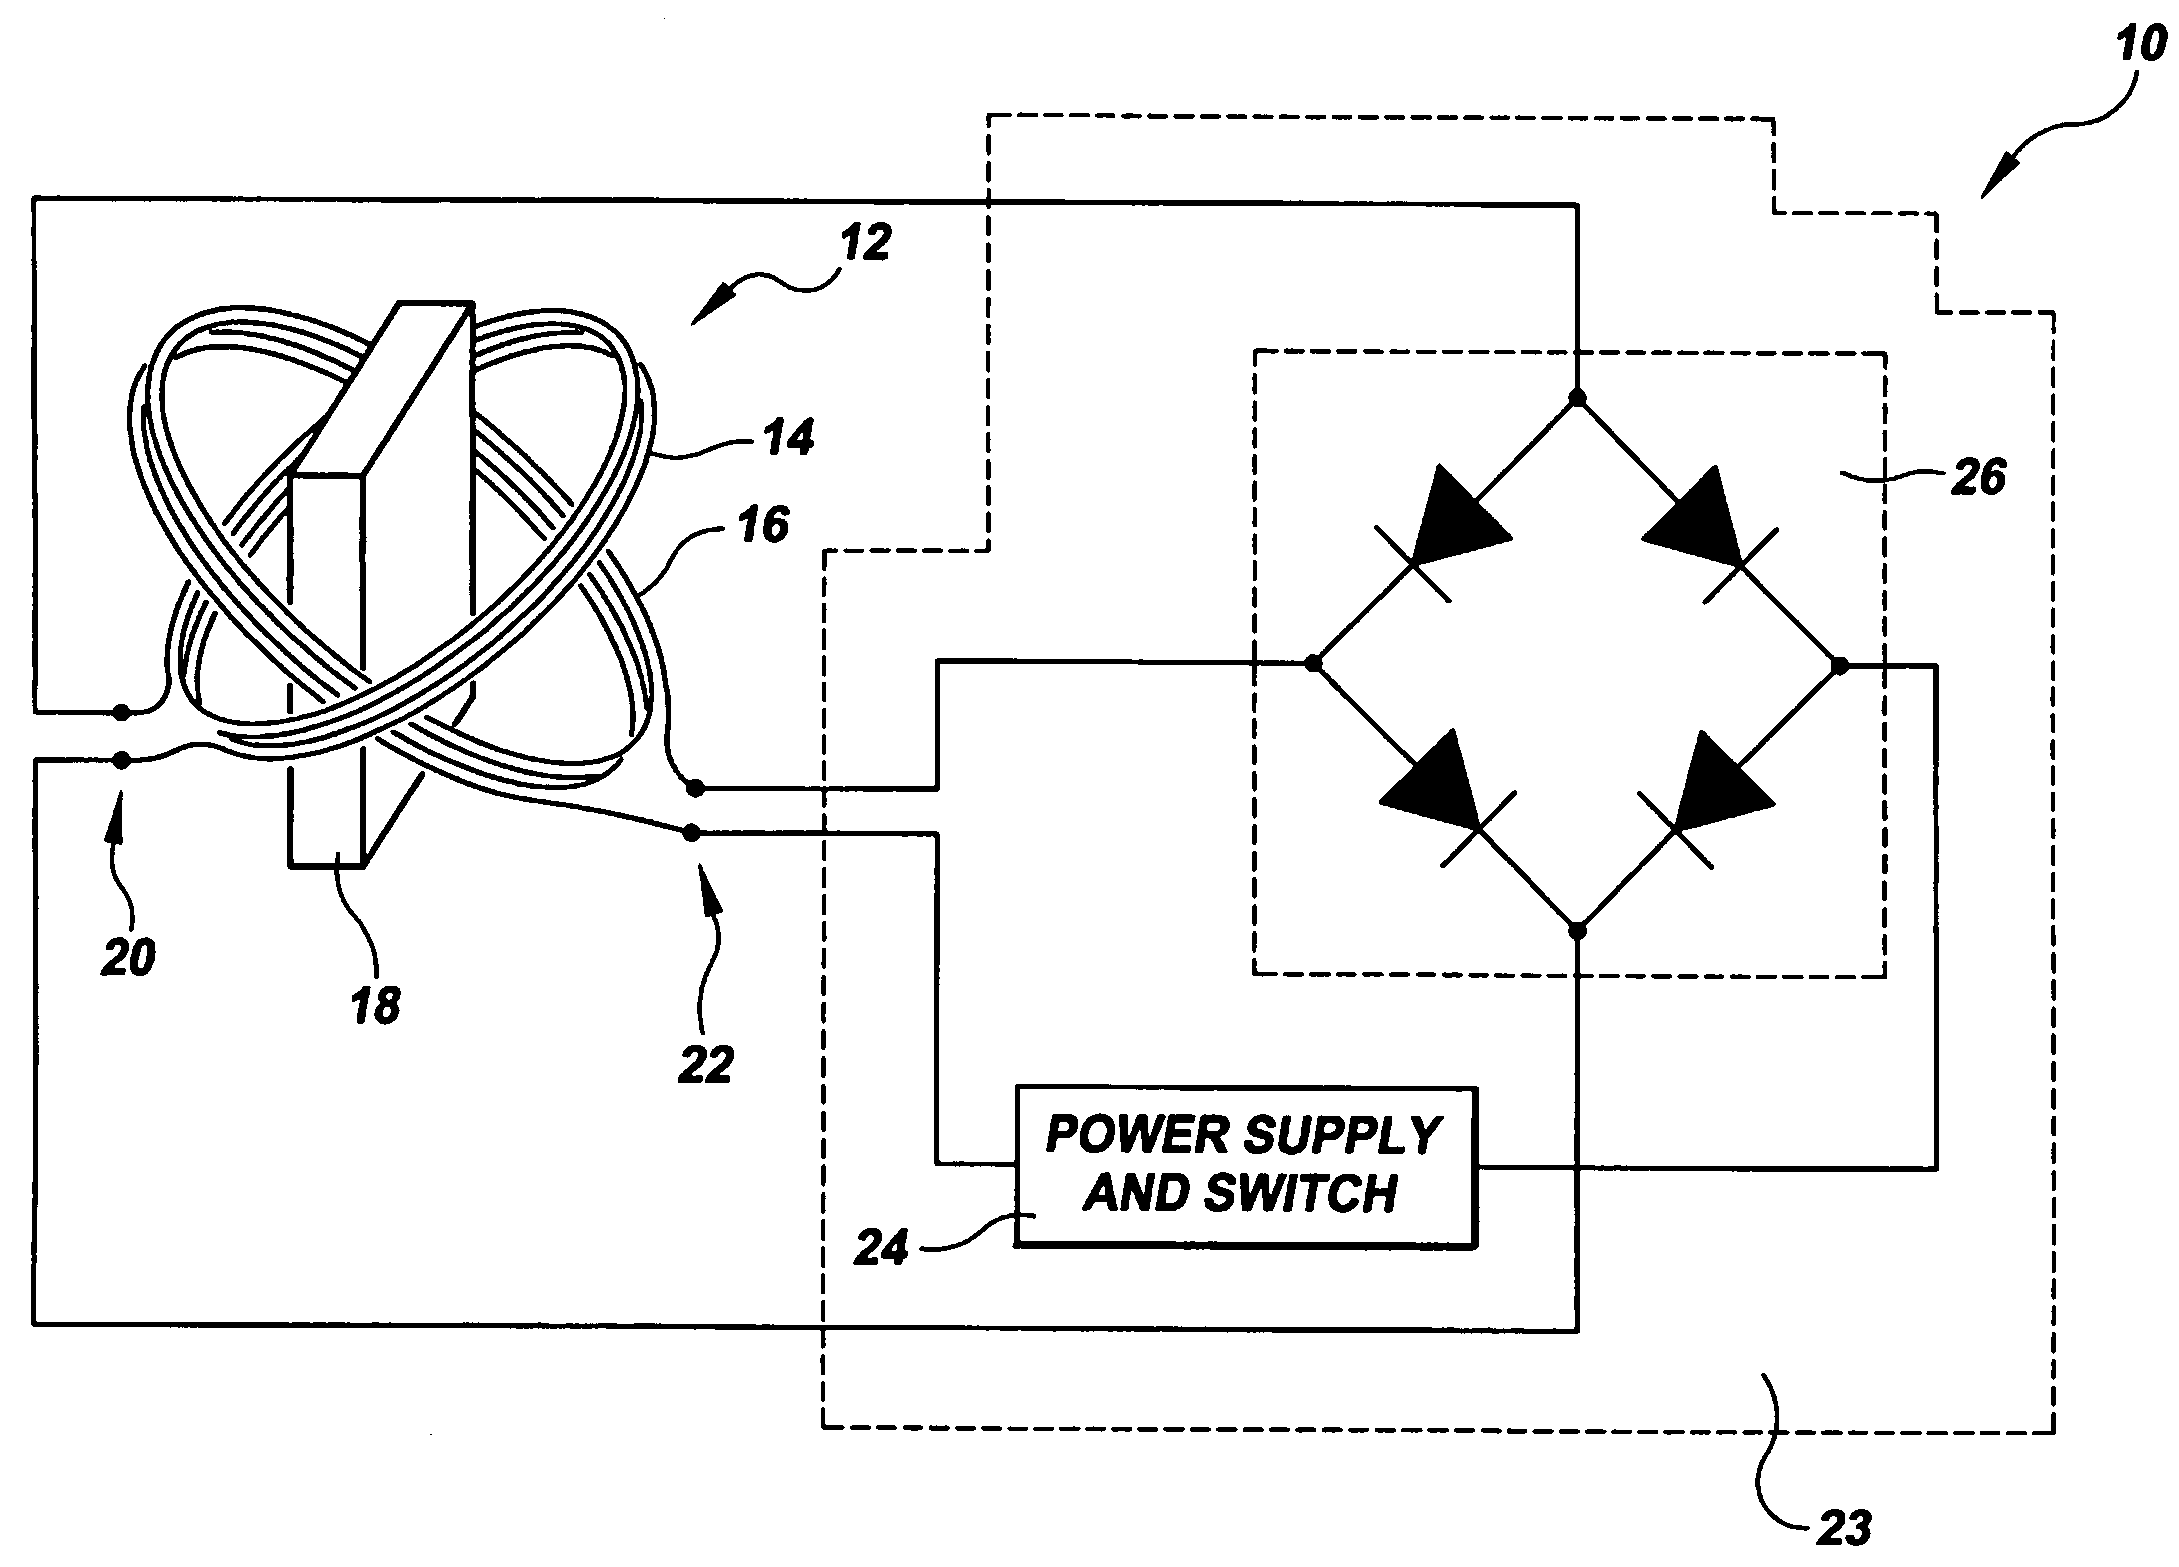 Magnetic actuator drive for actuation and resetting of magnetic actuation materials